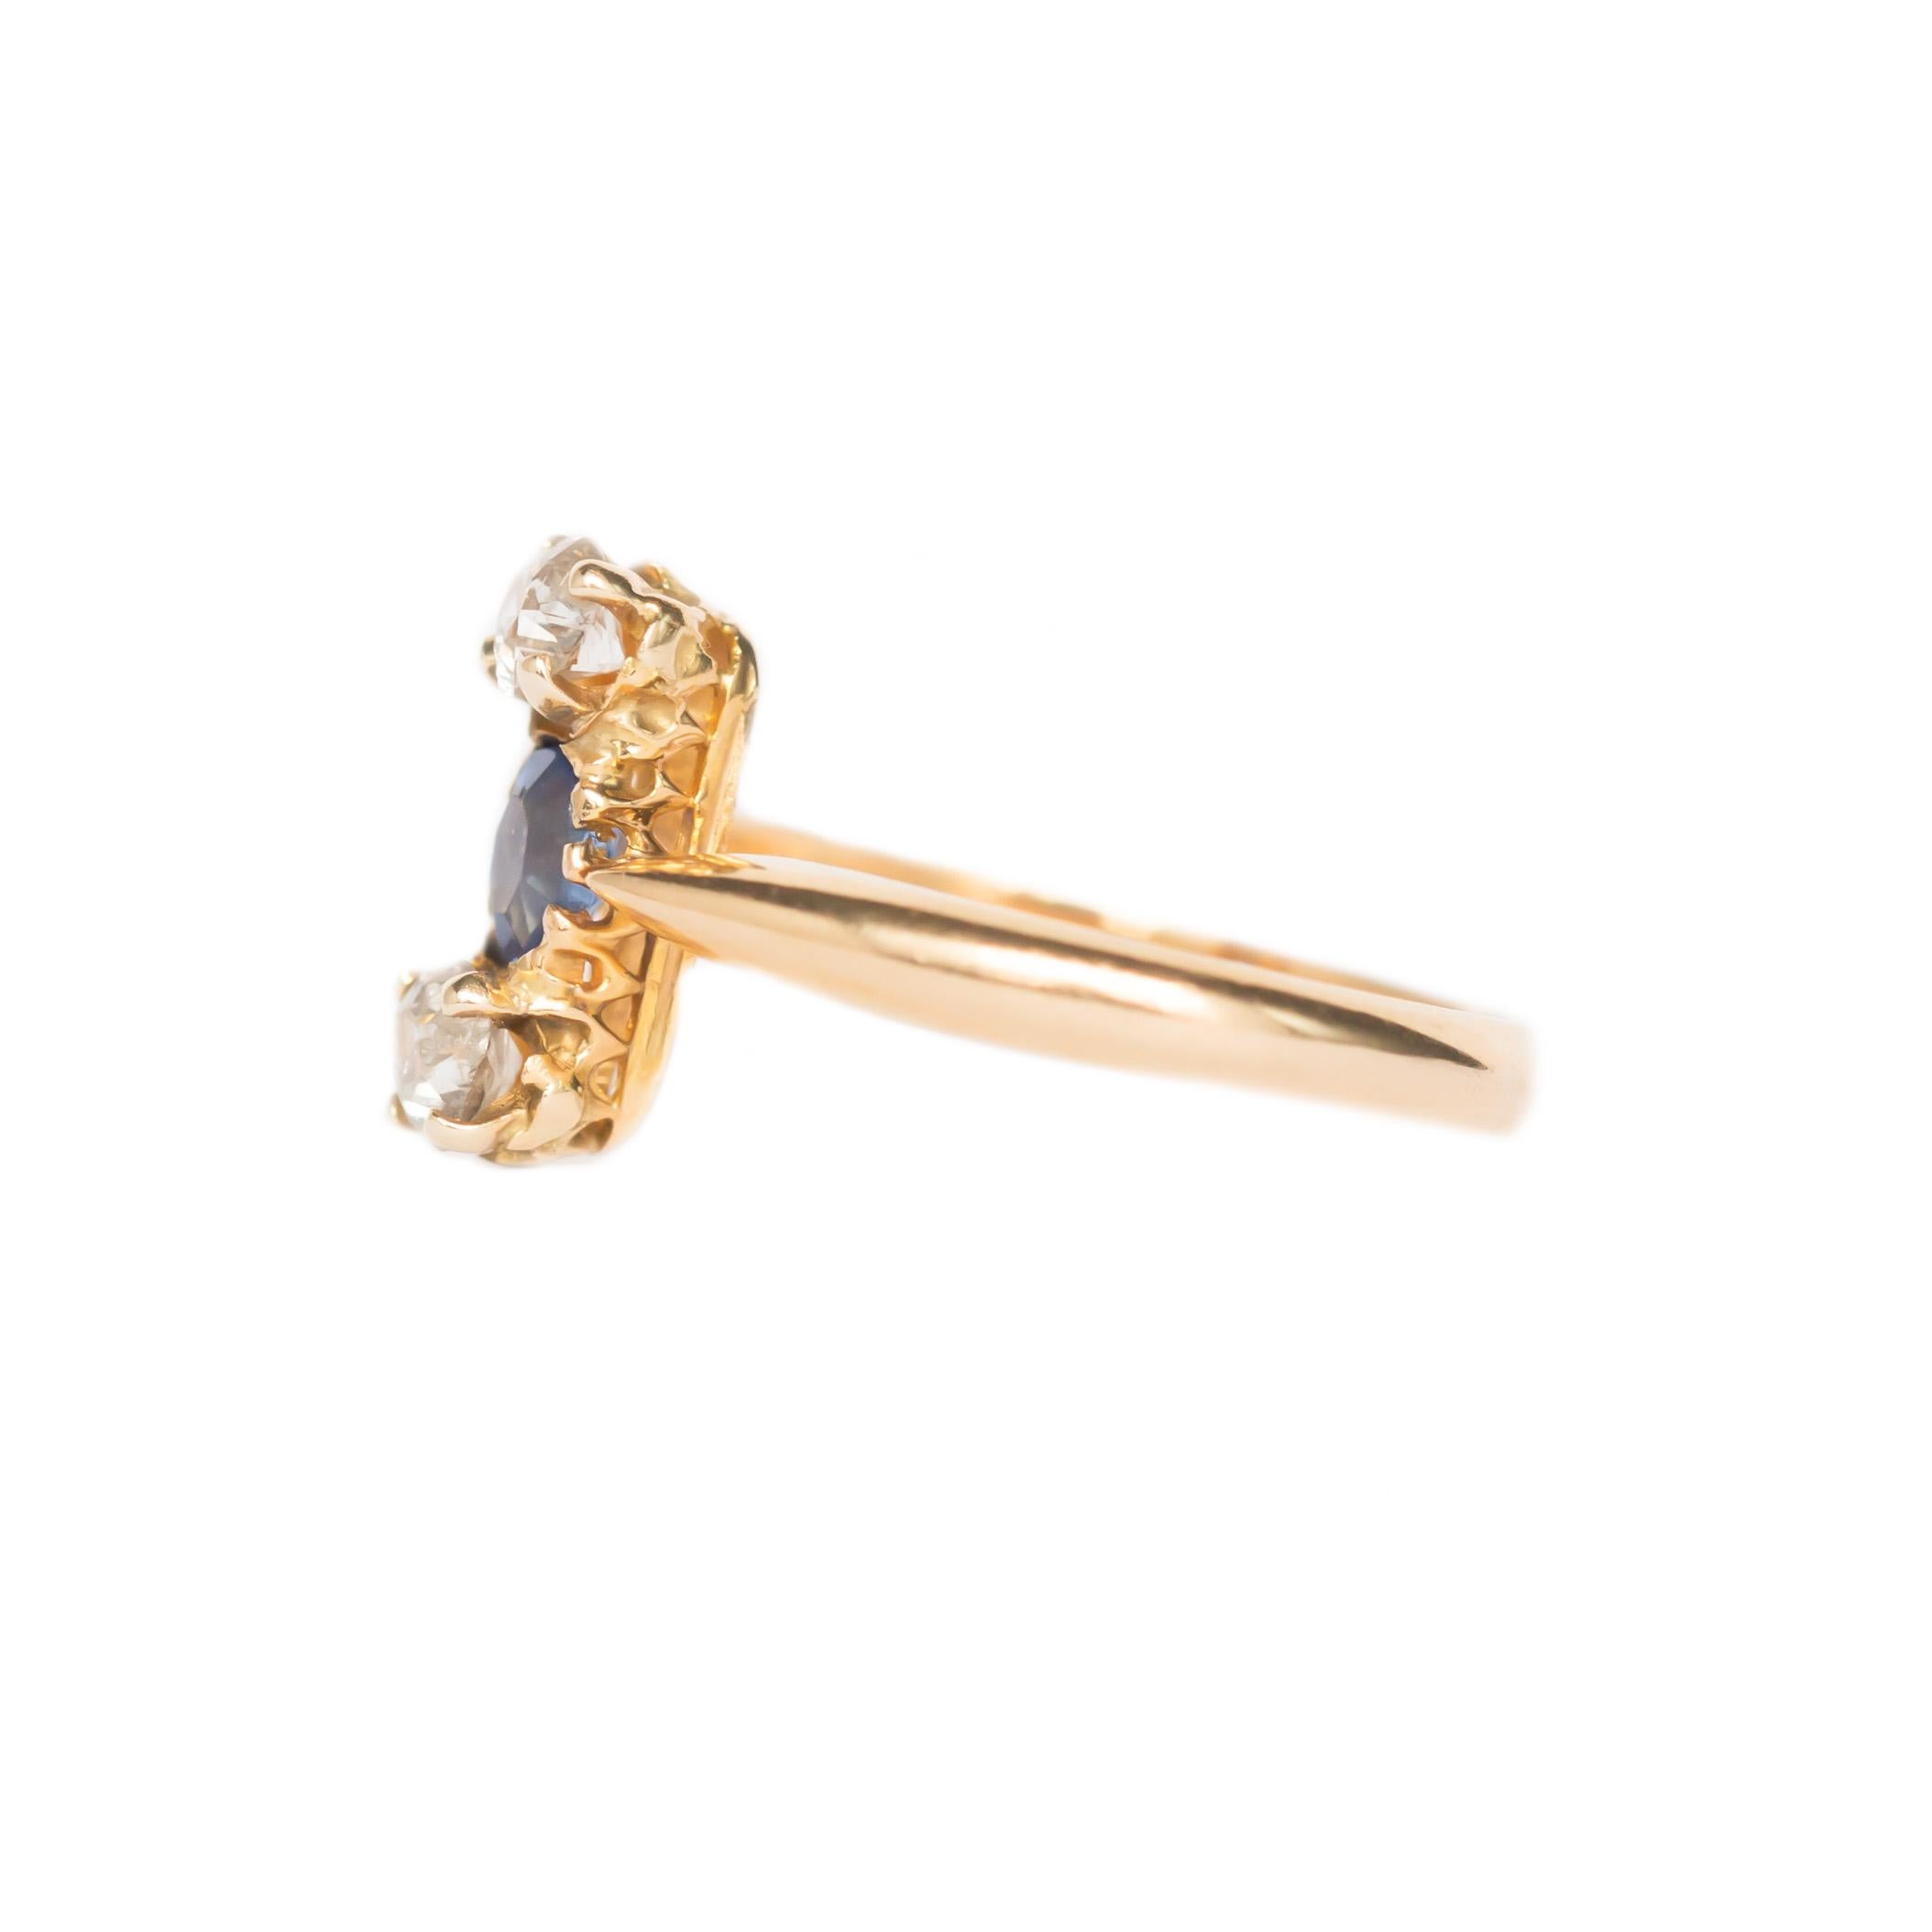 Ring Size: 4
Metal Type: 18 karat Yellow Gold
Weight: 2.0 grams

Diamond Details
Shape: Antique Cushion
Carat Weight: .25 carat, total weight
Color: J
Clarity: SI

Color Stone Details: 
Type: Sapphire (Unheated)
Shape: Antique Oval
Carat Weight: .20